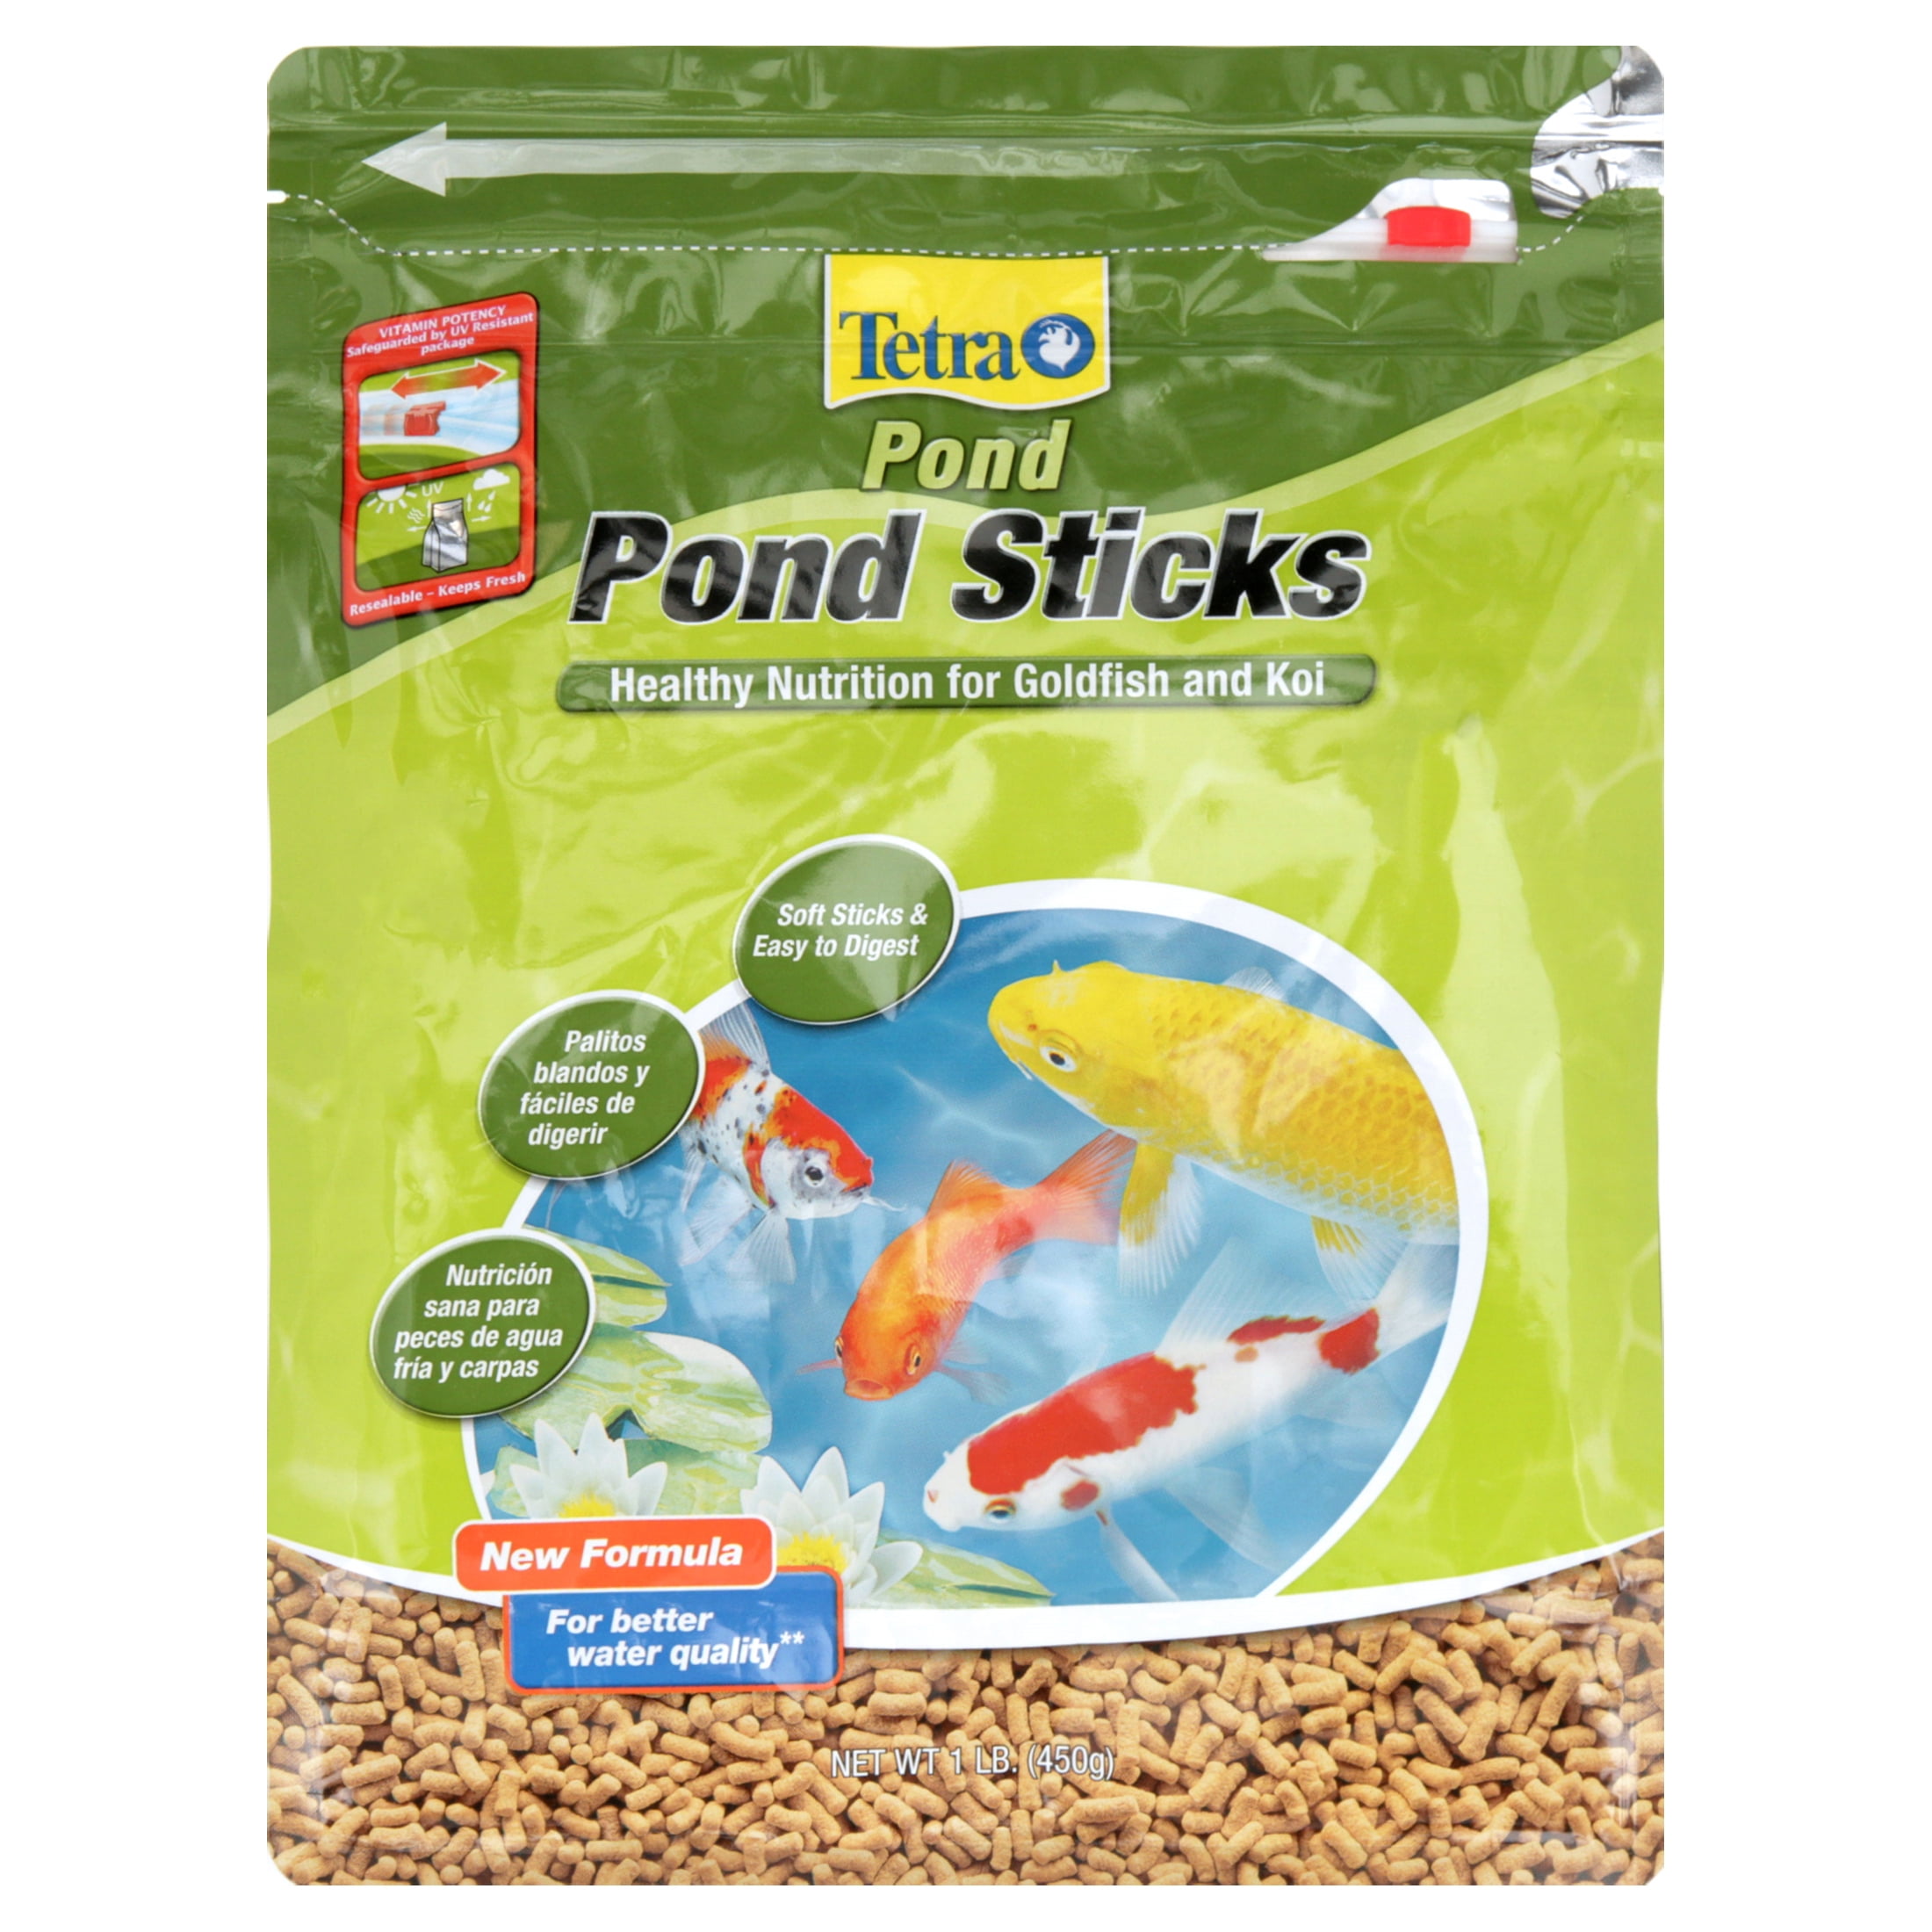 Tetra Pond Multi Mix Complete Varied Fish Food for Mixed Pond Fish 1 Litre